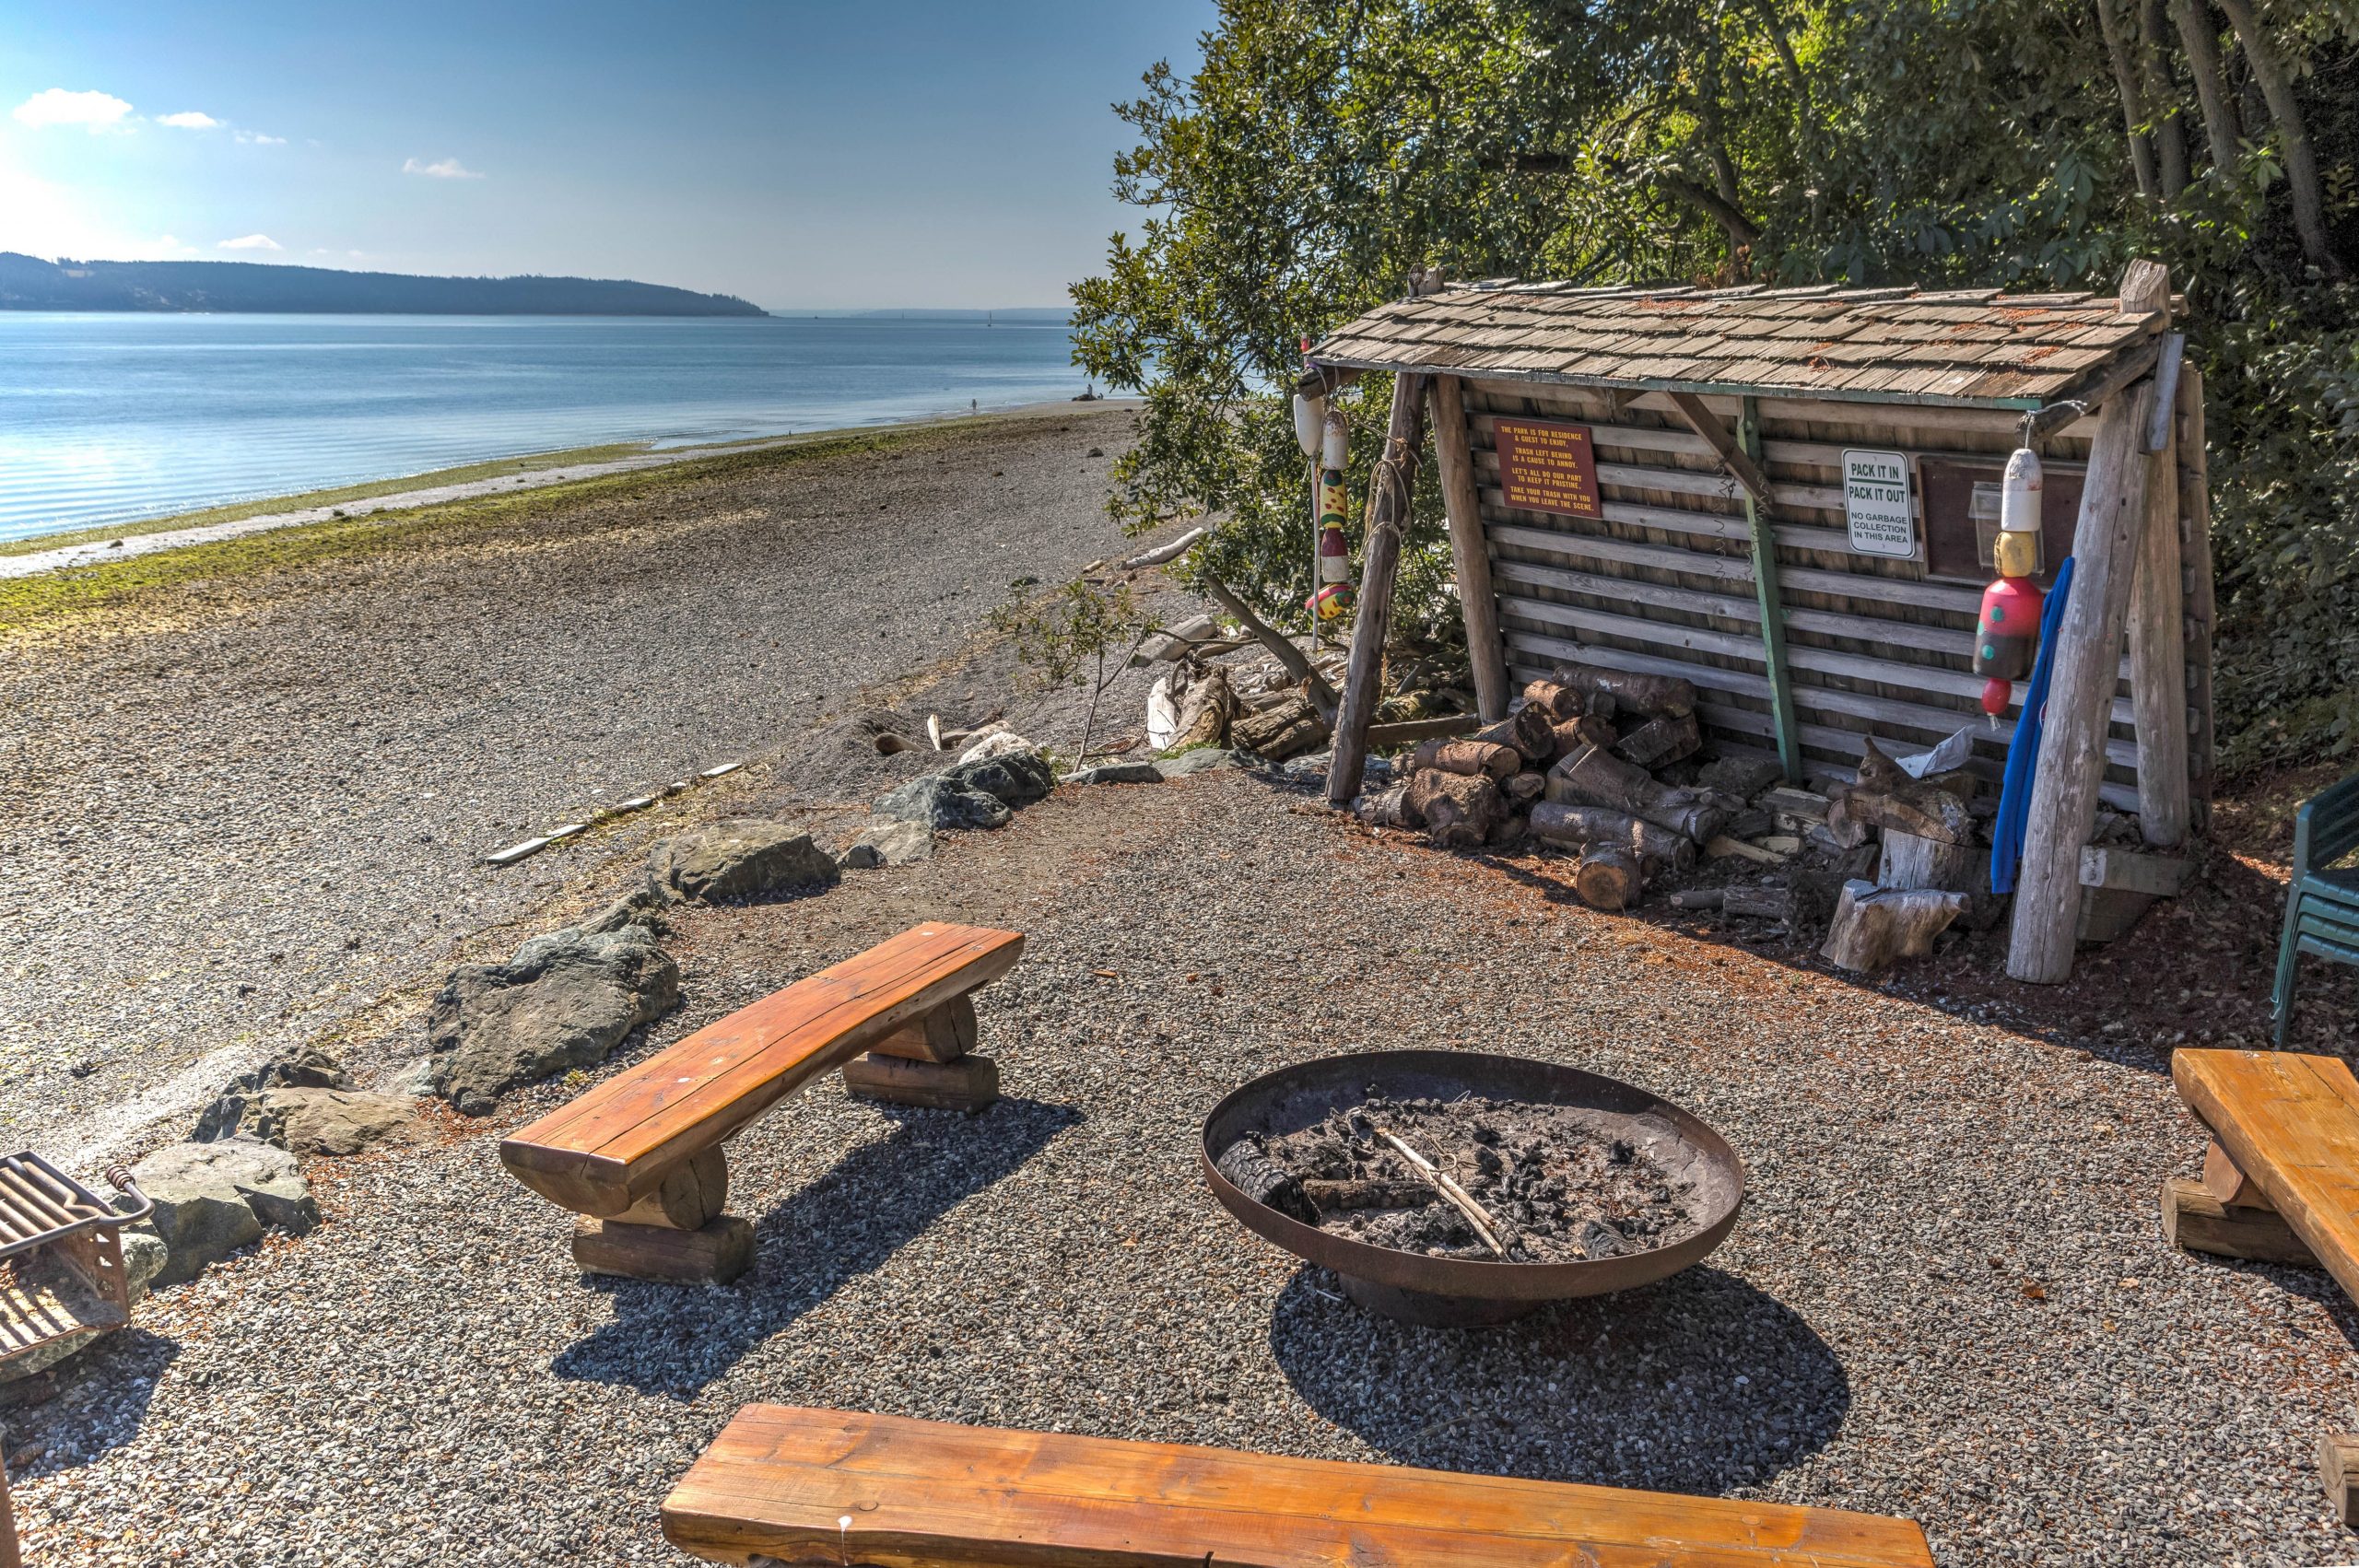 ShangriLa, Coupeville, WA, Washington, fire pit, camping, beachfront, explore outdoors, Whidbey Island, Island Life, South Whidbey